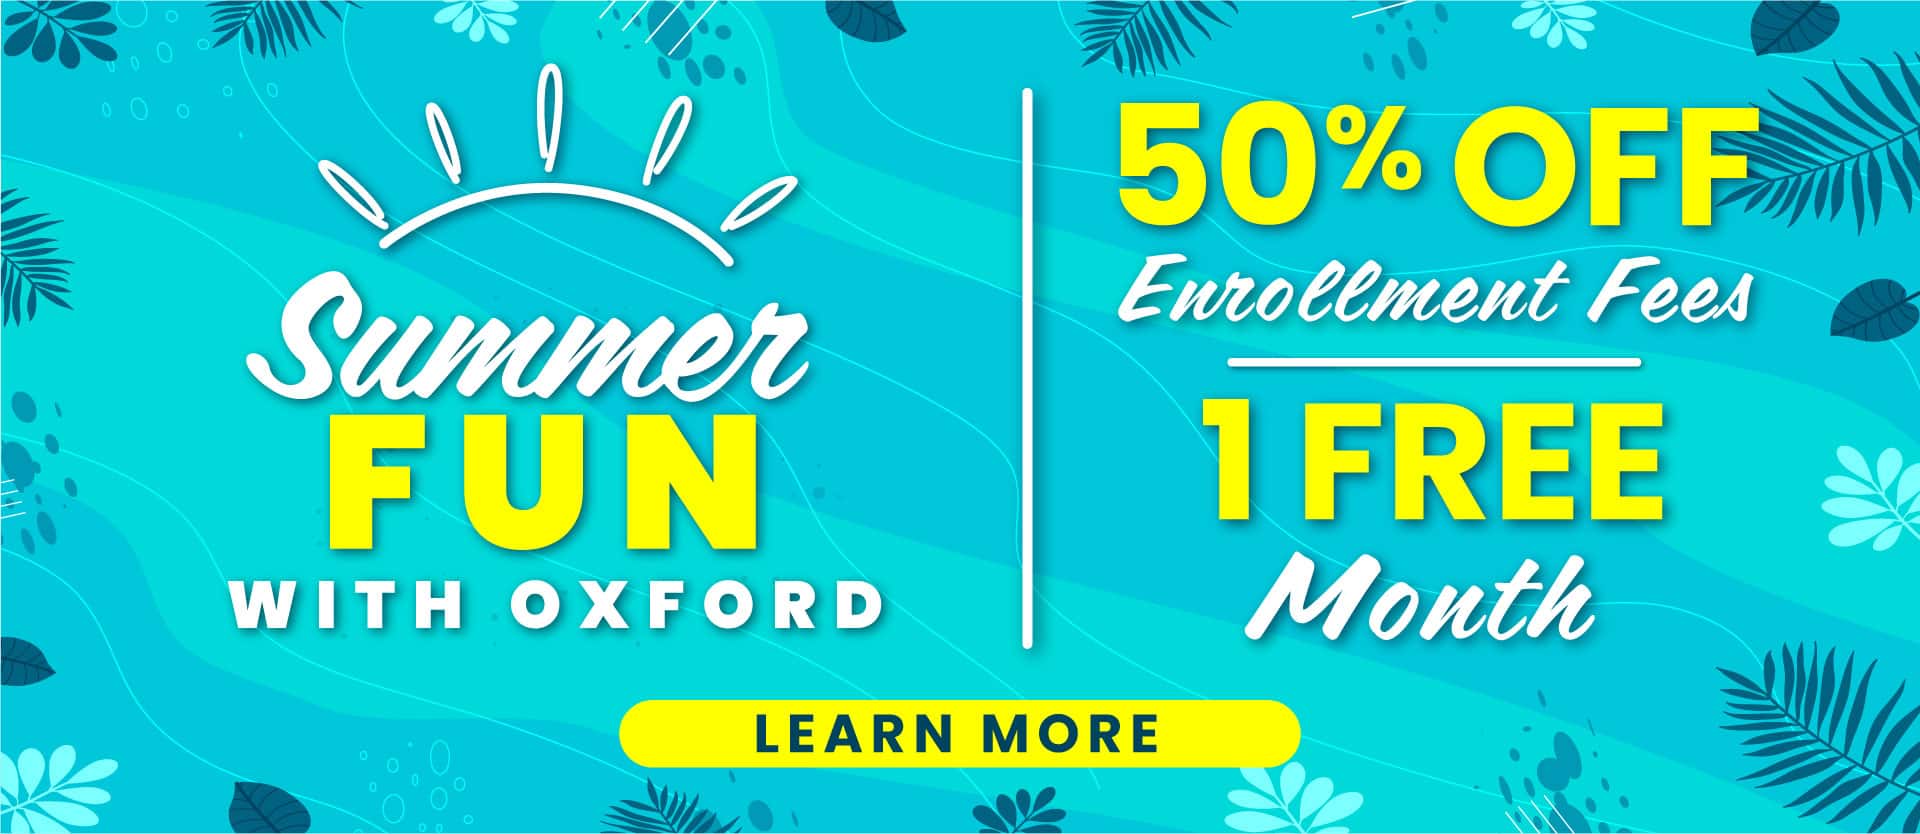 Home page Slider image for Summer Fun with Oxford August Promo Info